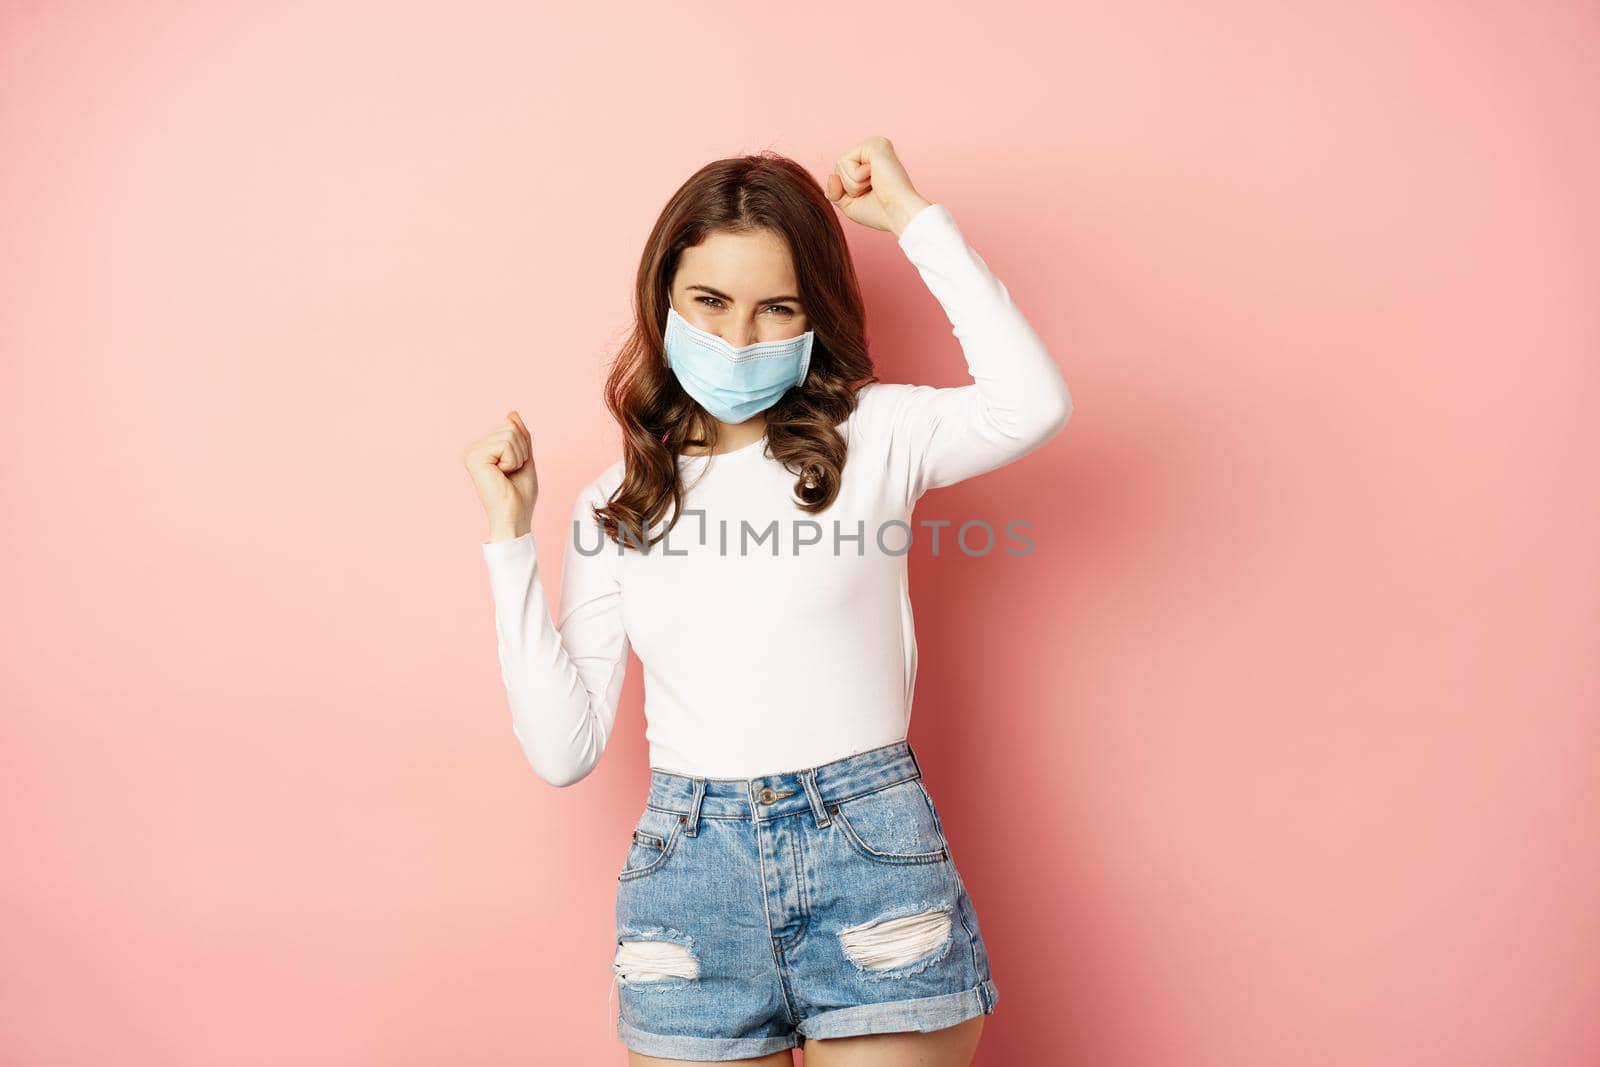 Enthusiastic brunette girl in medical face mask, dancing and laughing, celebrating victory, triumphing, winning smth, standing over pink background.